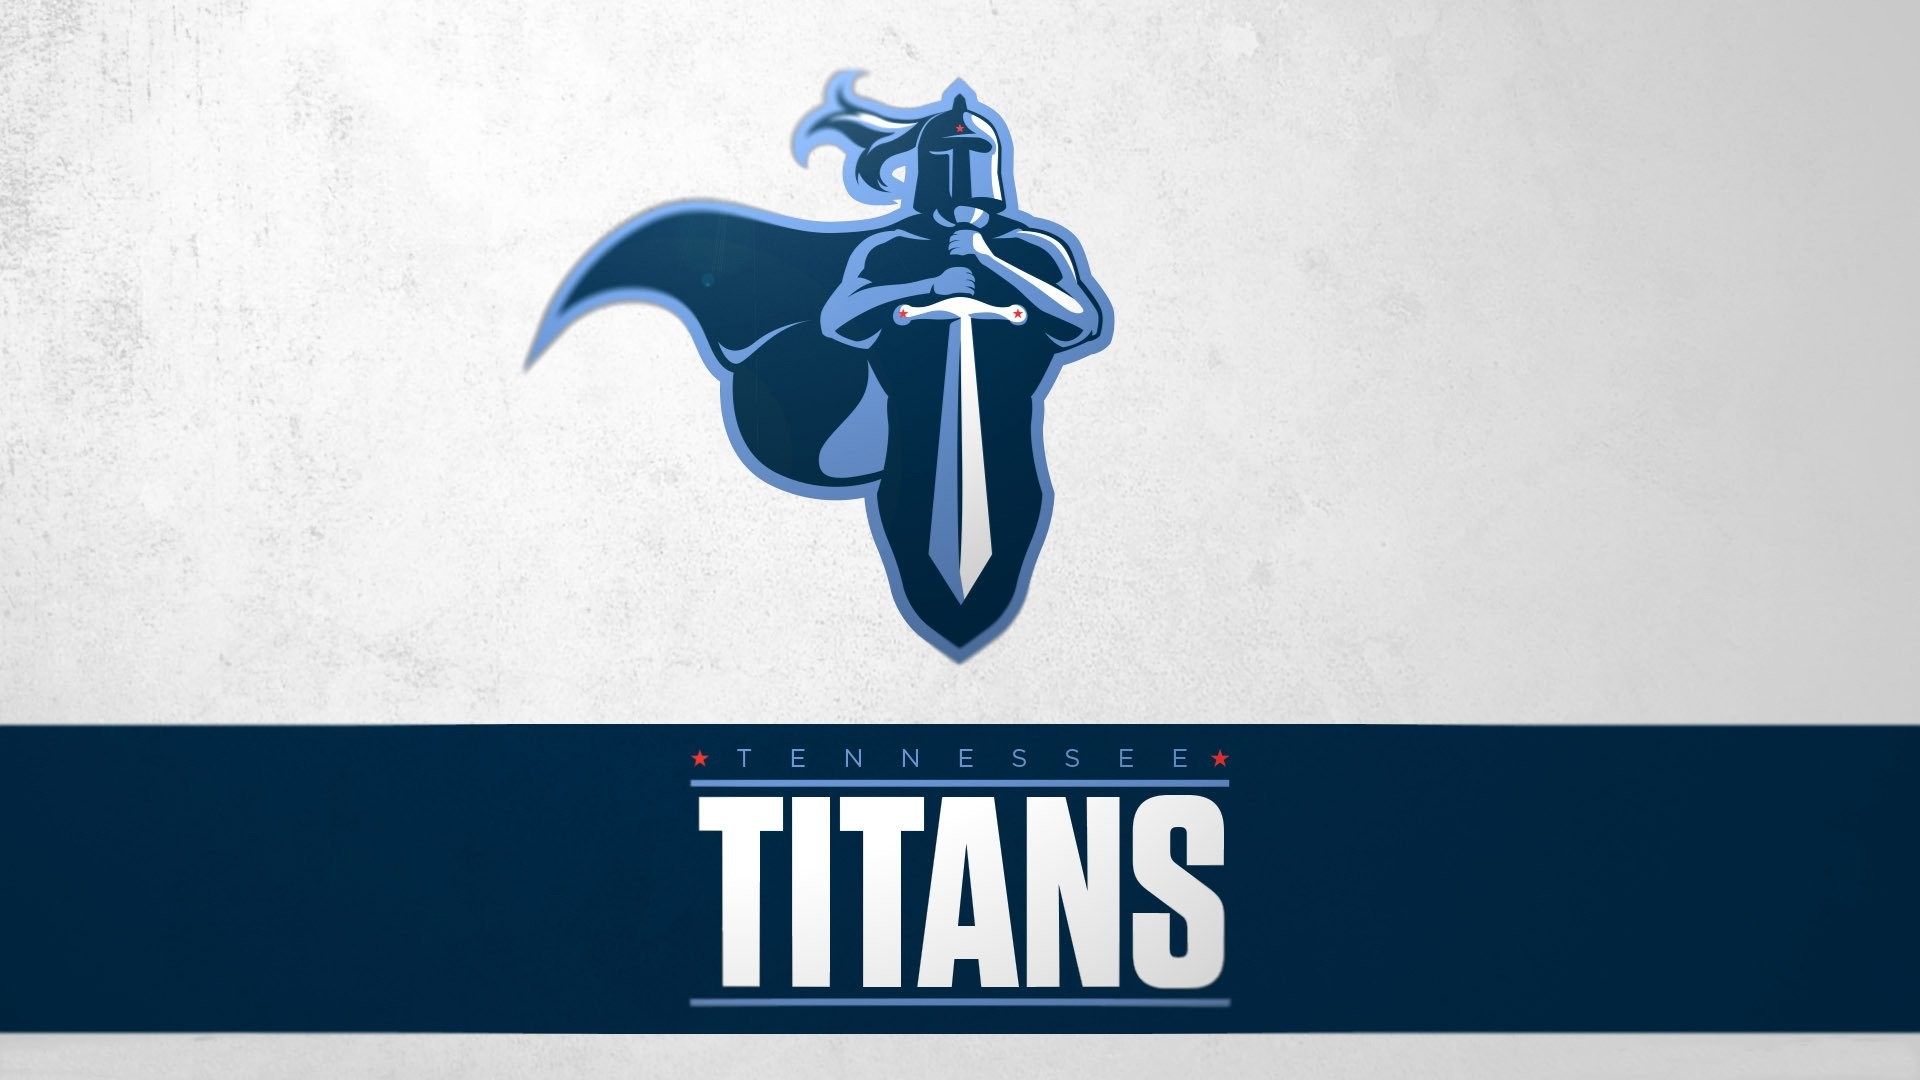 Wallpaper Desktop Tennessee Titans HD with high-resolution 1920x1080 pixel. You can use this wallpaper for your Mac or Windows Desktop Background, iPhone, Android or Tablet and another Smartphone device